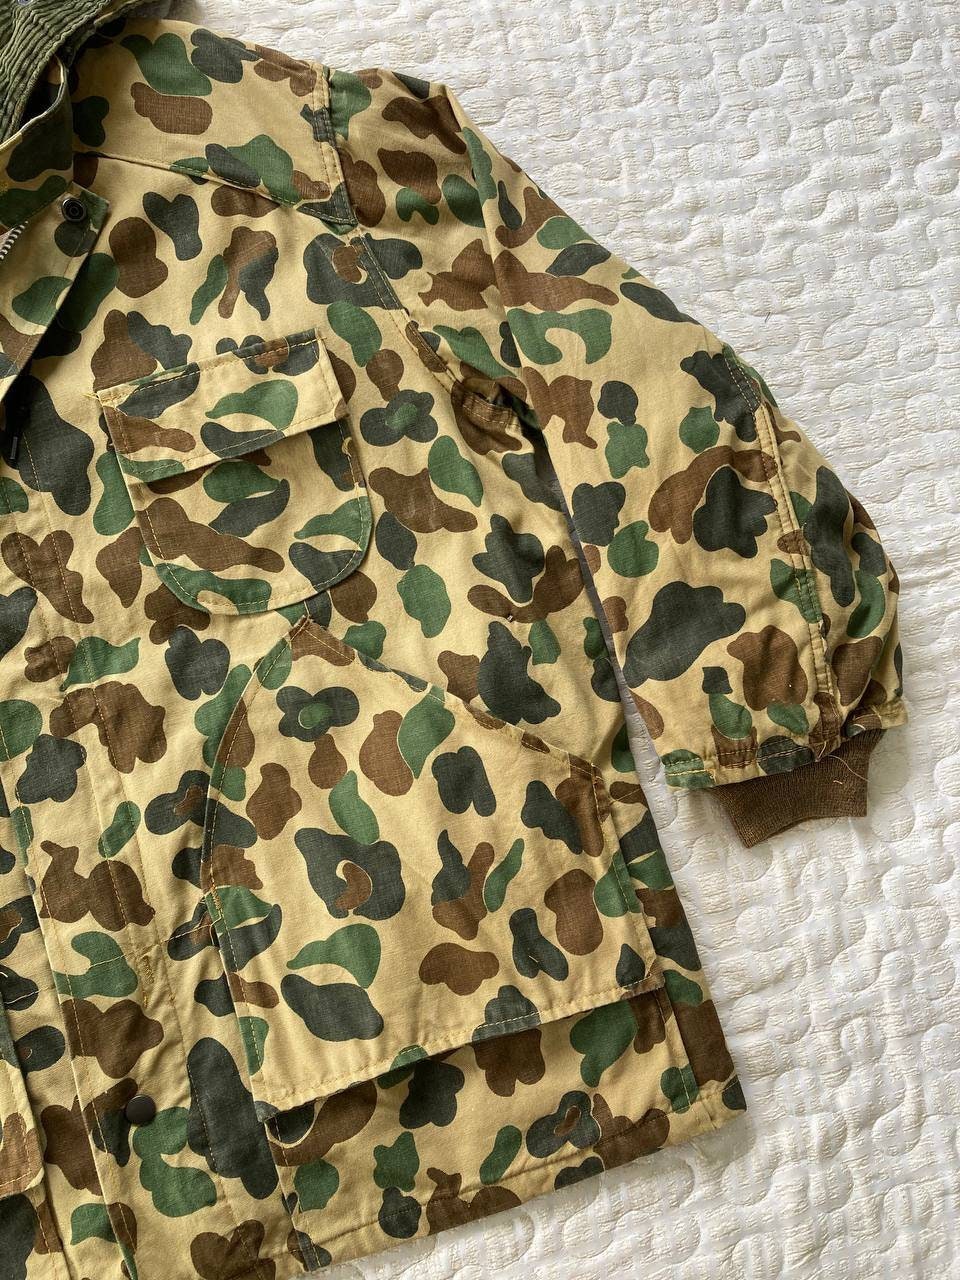 Vintage 1960s/1970s Duck Camo Hunting Jacket | Etsy